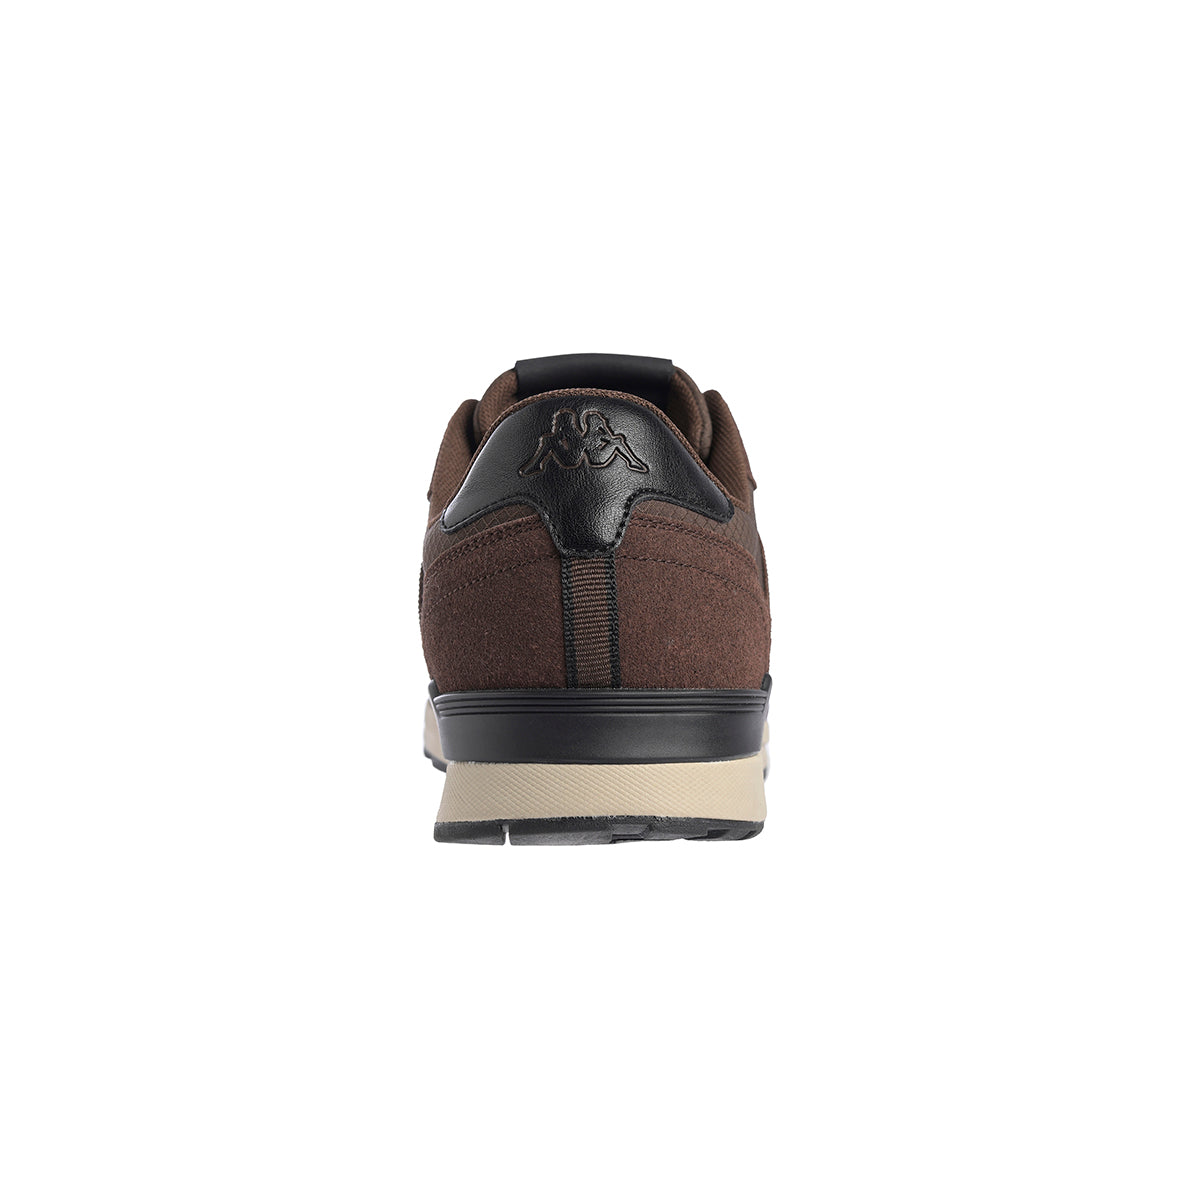 Chaussures lifestyle Midiano marron homme - Image 3